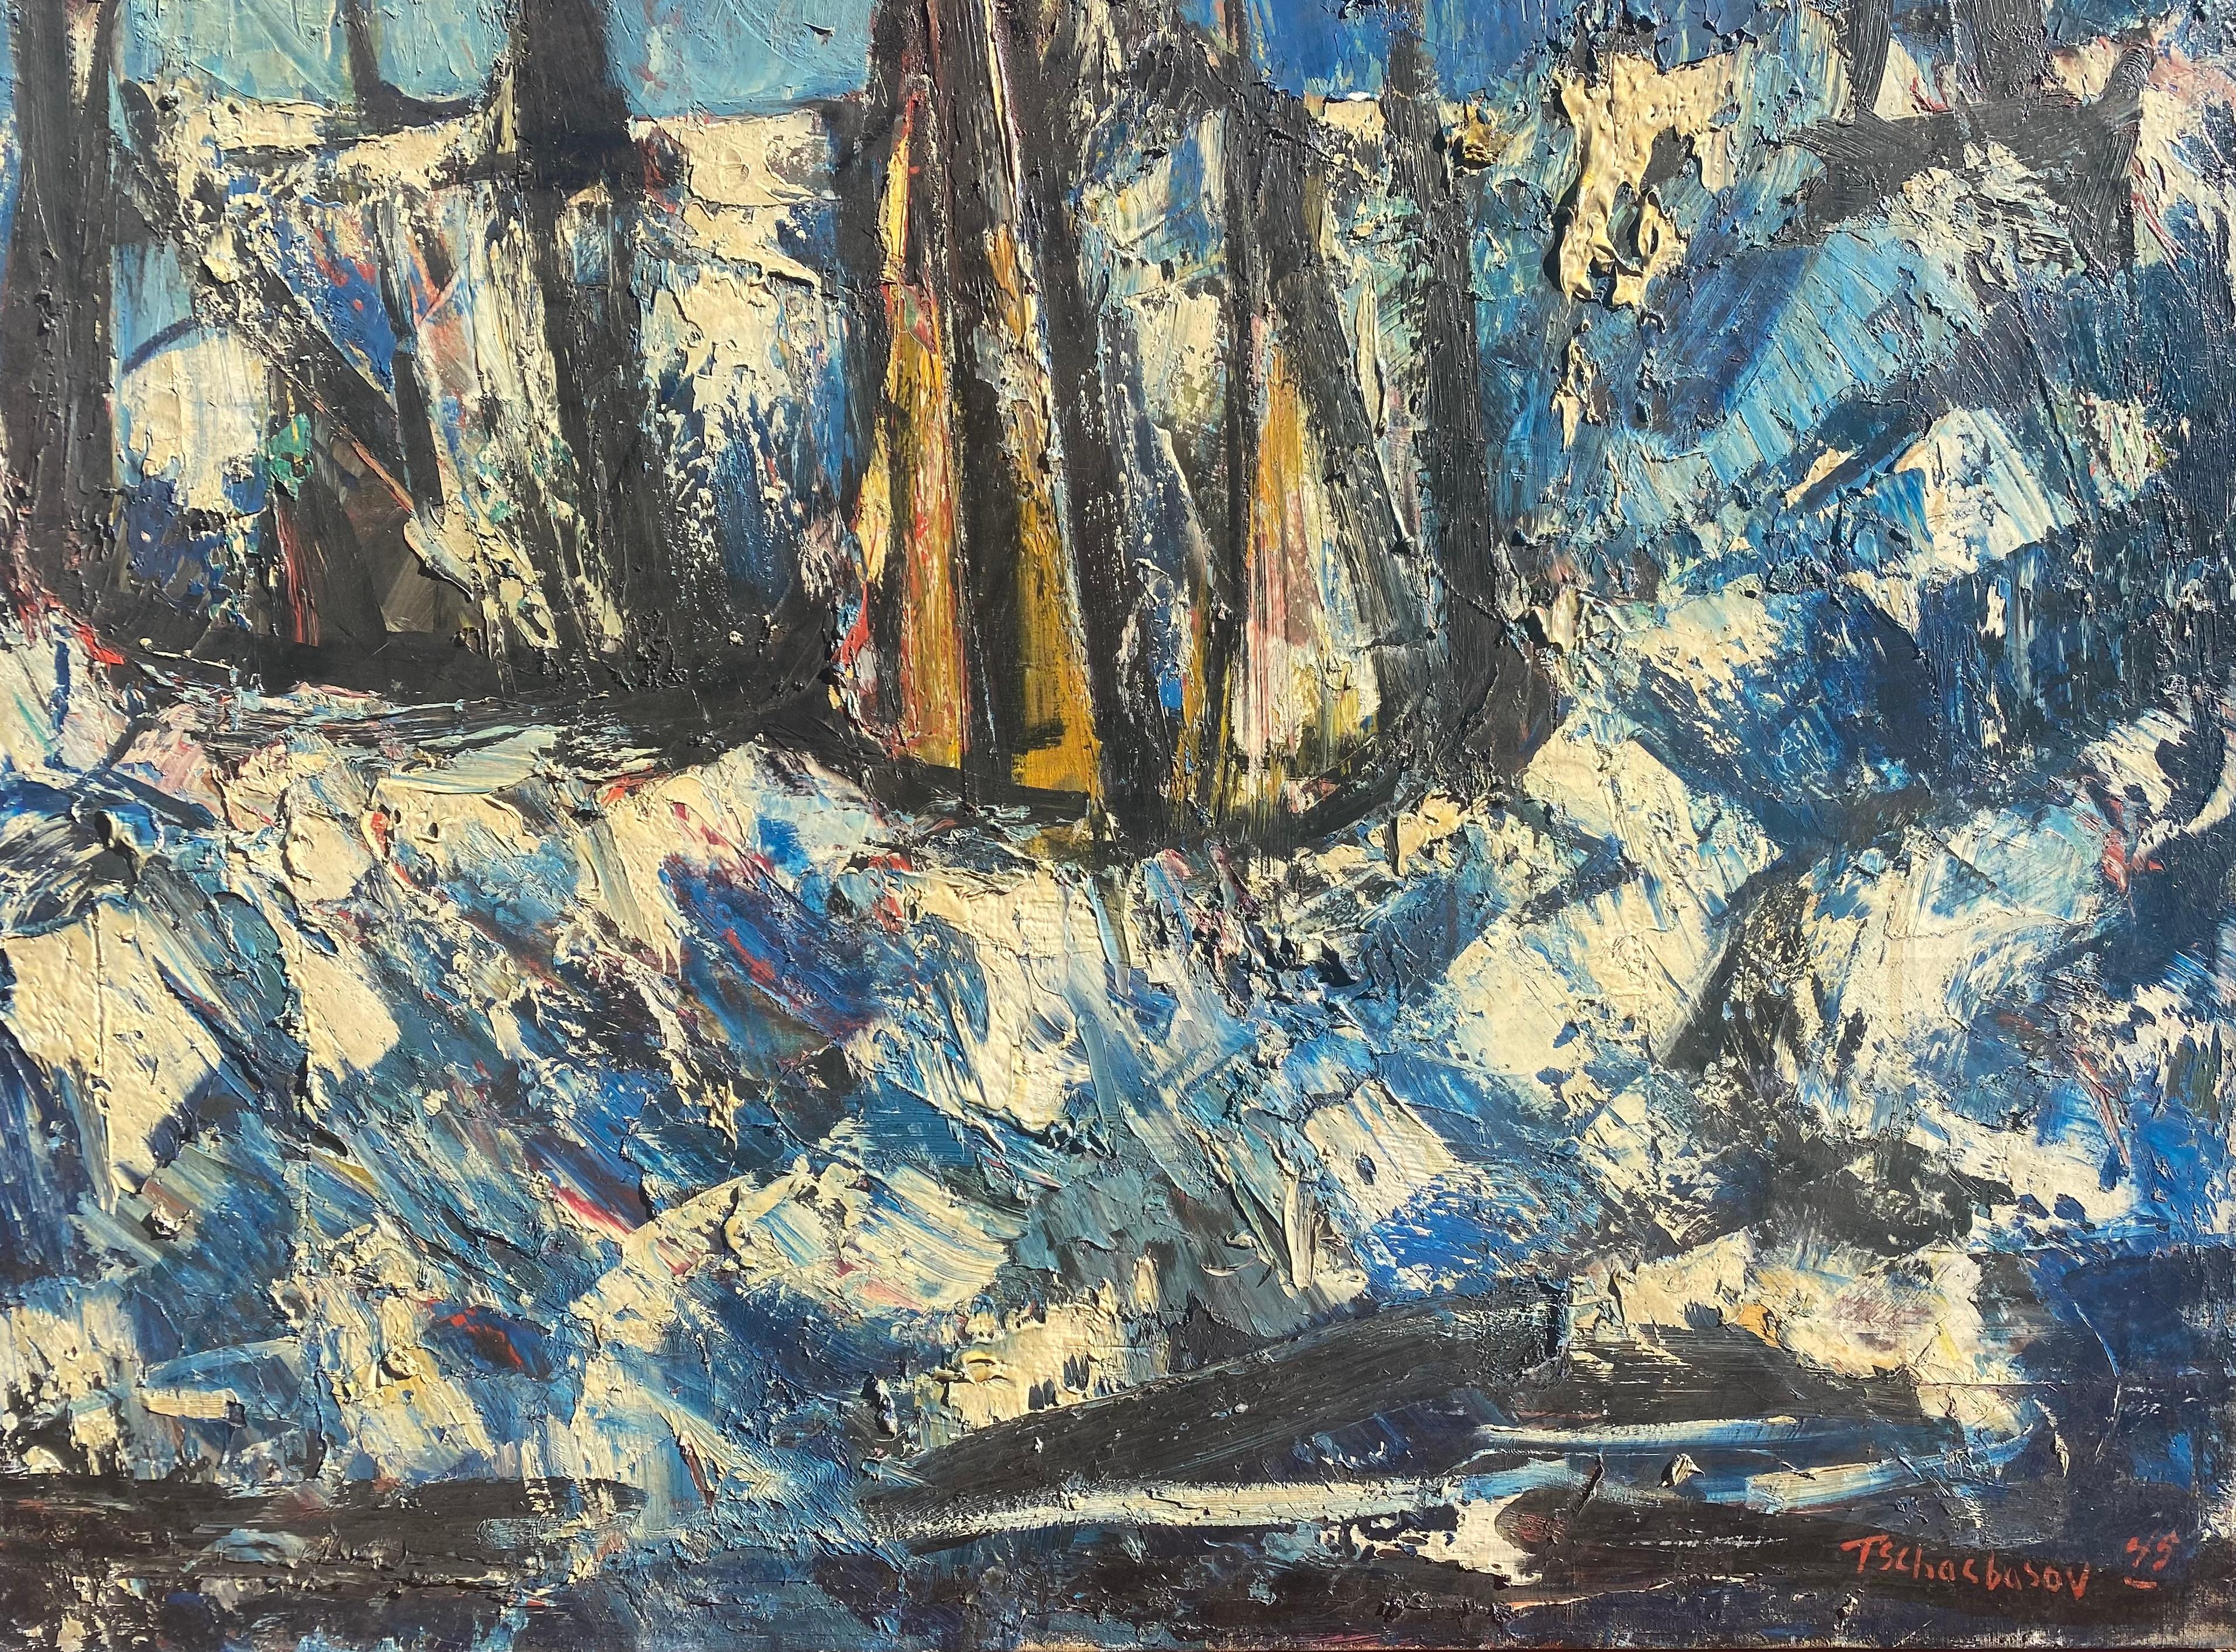 Early original oil on canvas painting of sailboats in stormy seas by the American artist, Nahum Tschacbasov. Artist signed lower right and dated 1945.  Condition is very good.  Presently unframed.  Provenance:  Estate of the artist Nahum